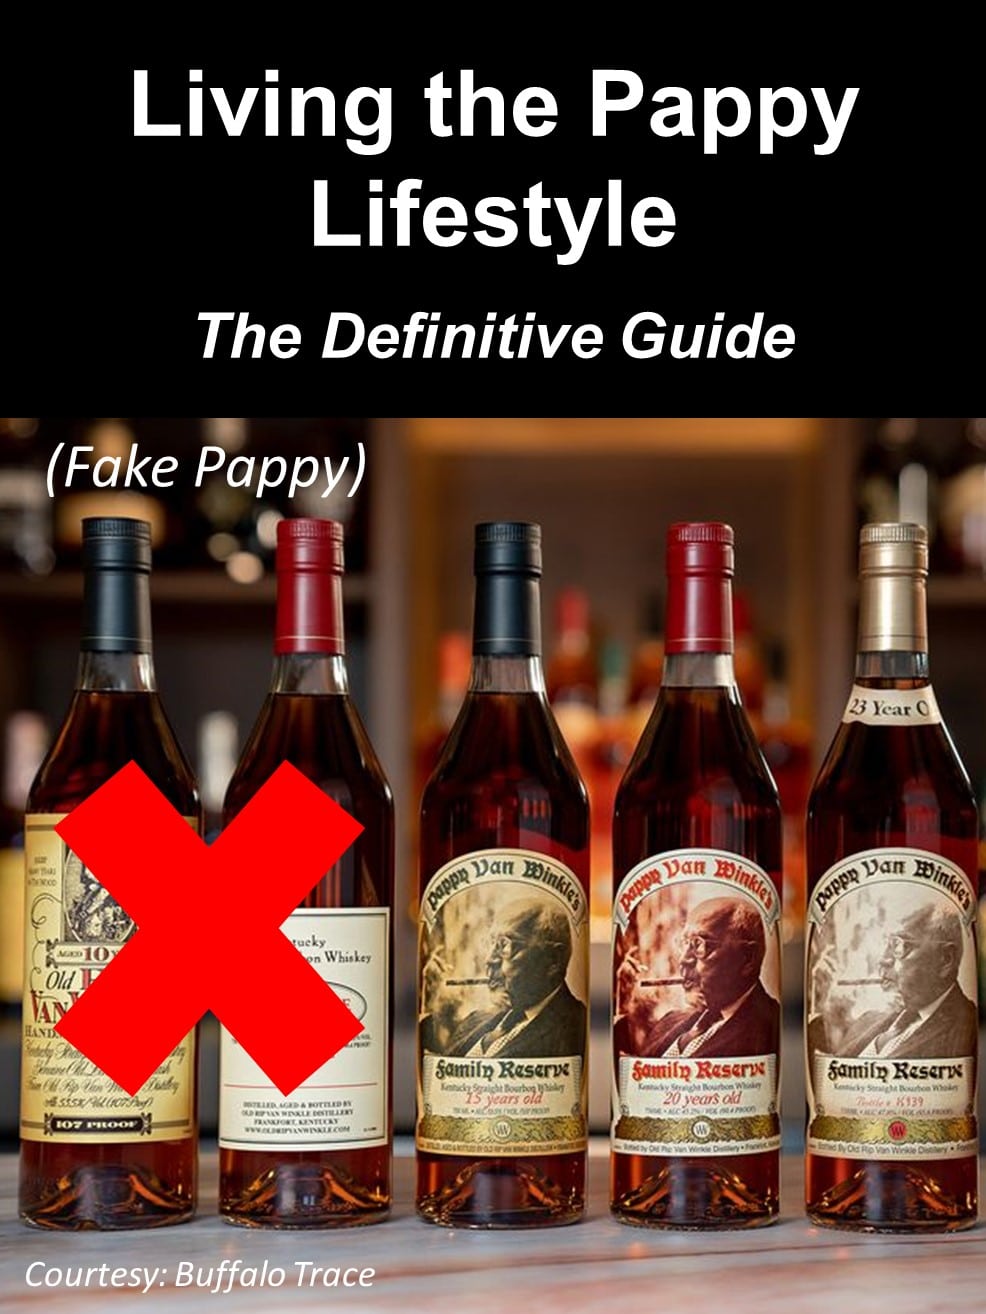 living the pappy lifestyle featured image